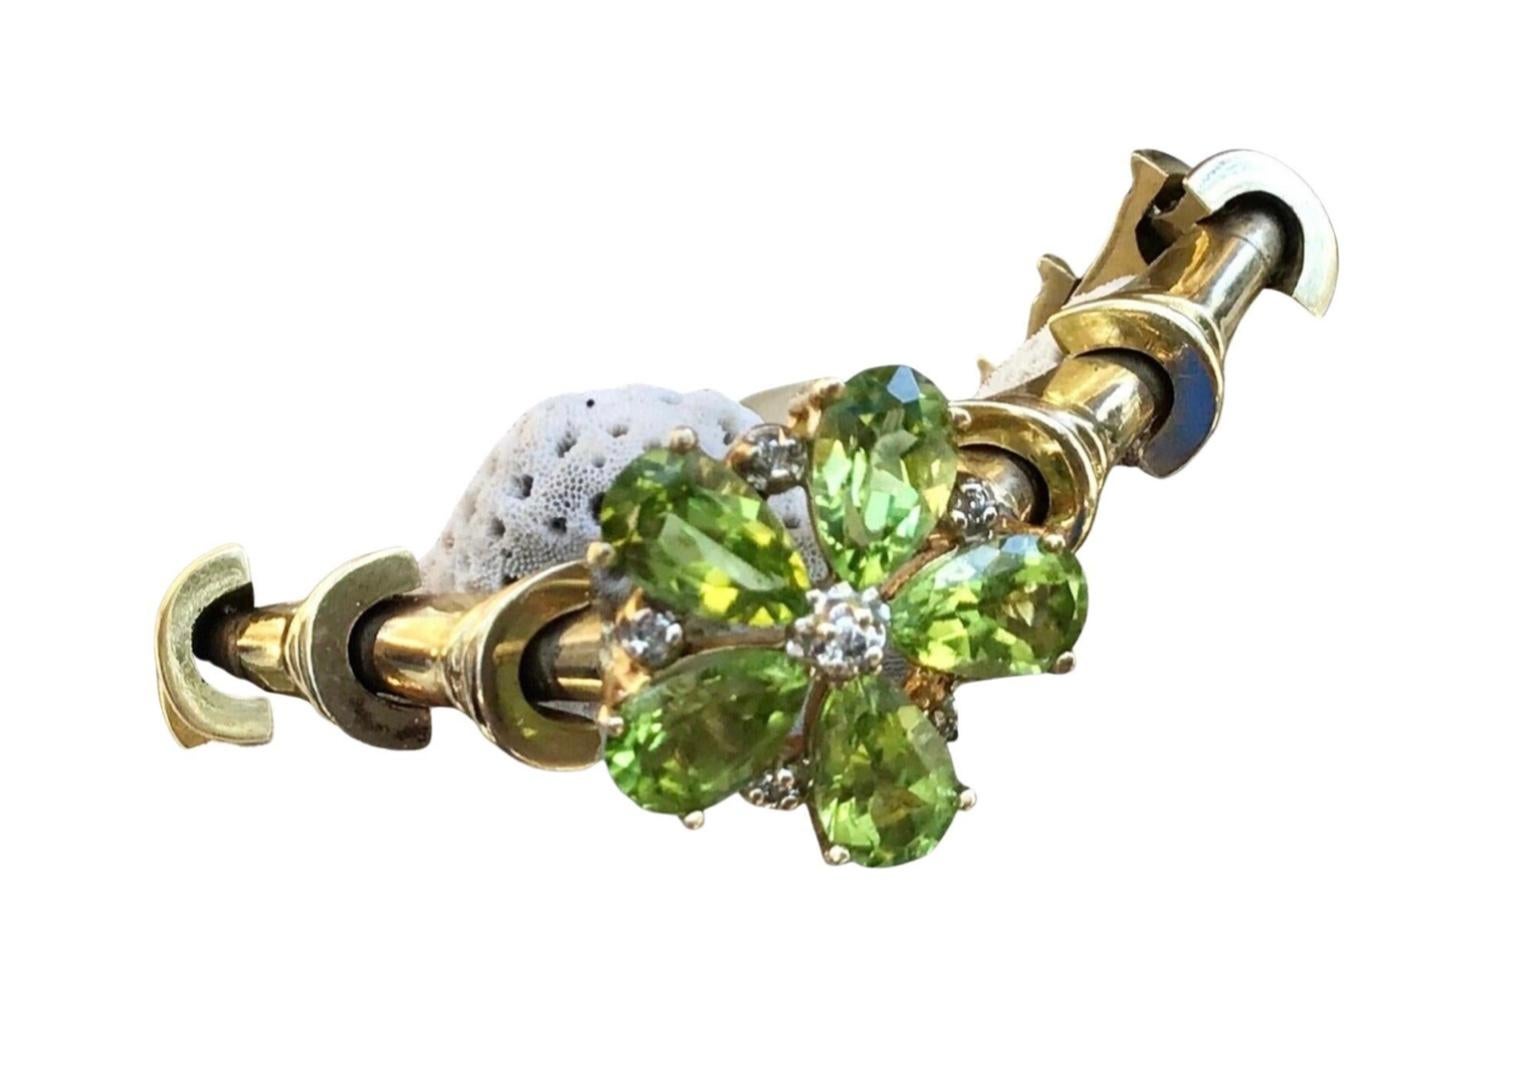 Stunning 14k yellow gold Peridot and Diamond Bracelet.  17.66 Grams TW. Each of the five peridot stones are approximately 0.5 carats for a total of 2.5 total carats. Marked 14k. Approximate diameter of bracelet is 6.5 inches 